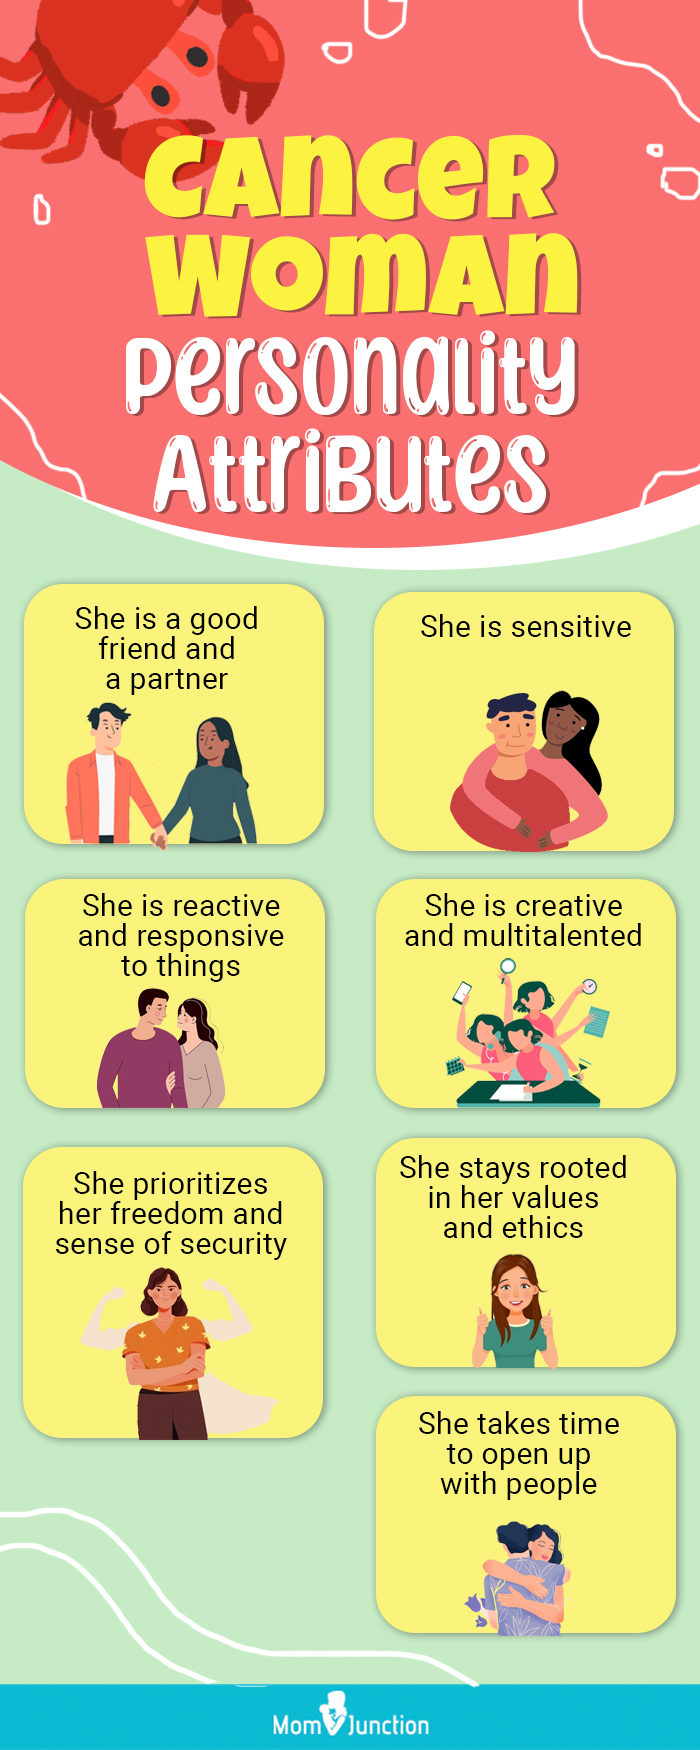 21 Characteristics And Traits Of A Cancer Woman